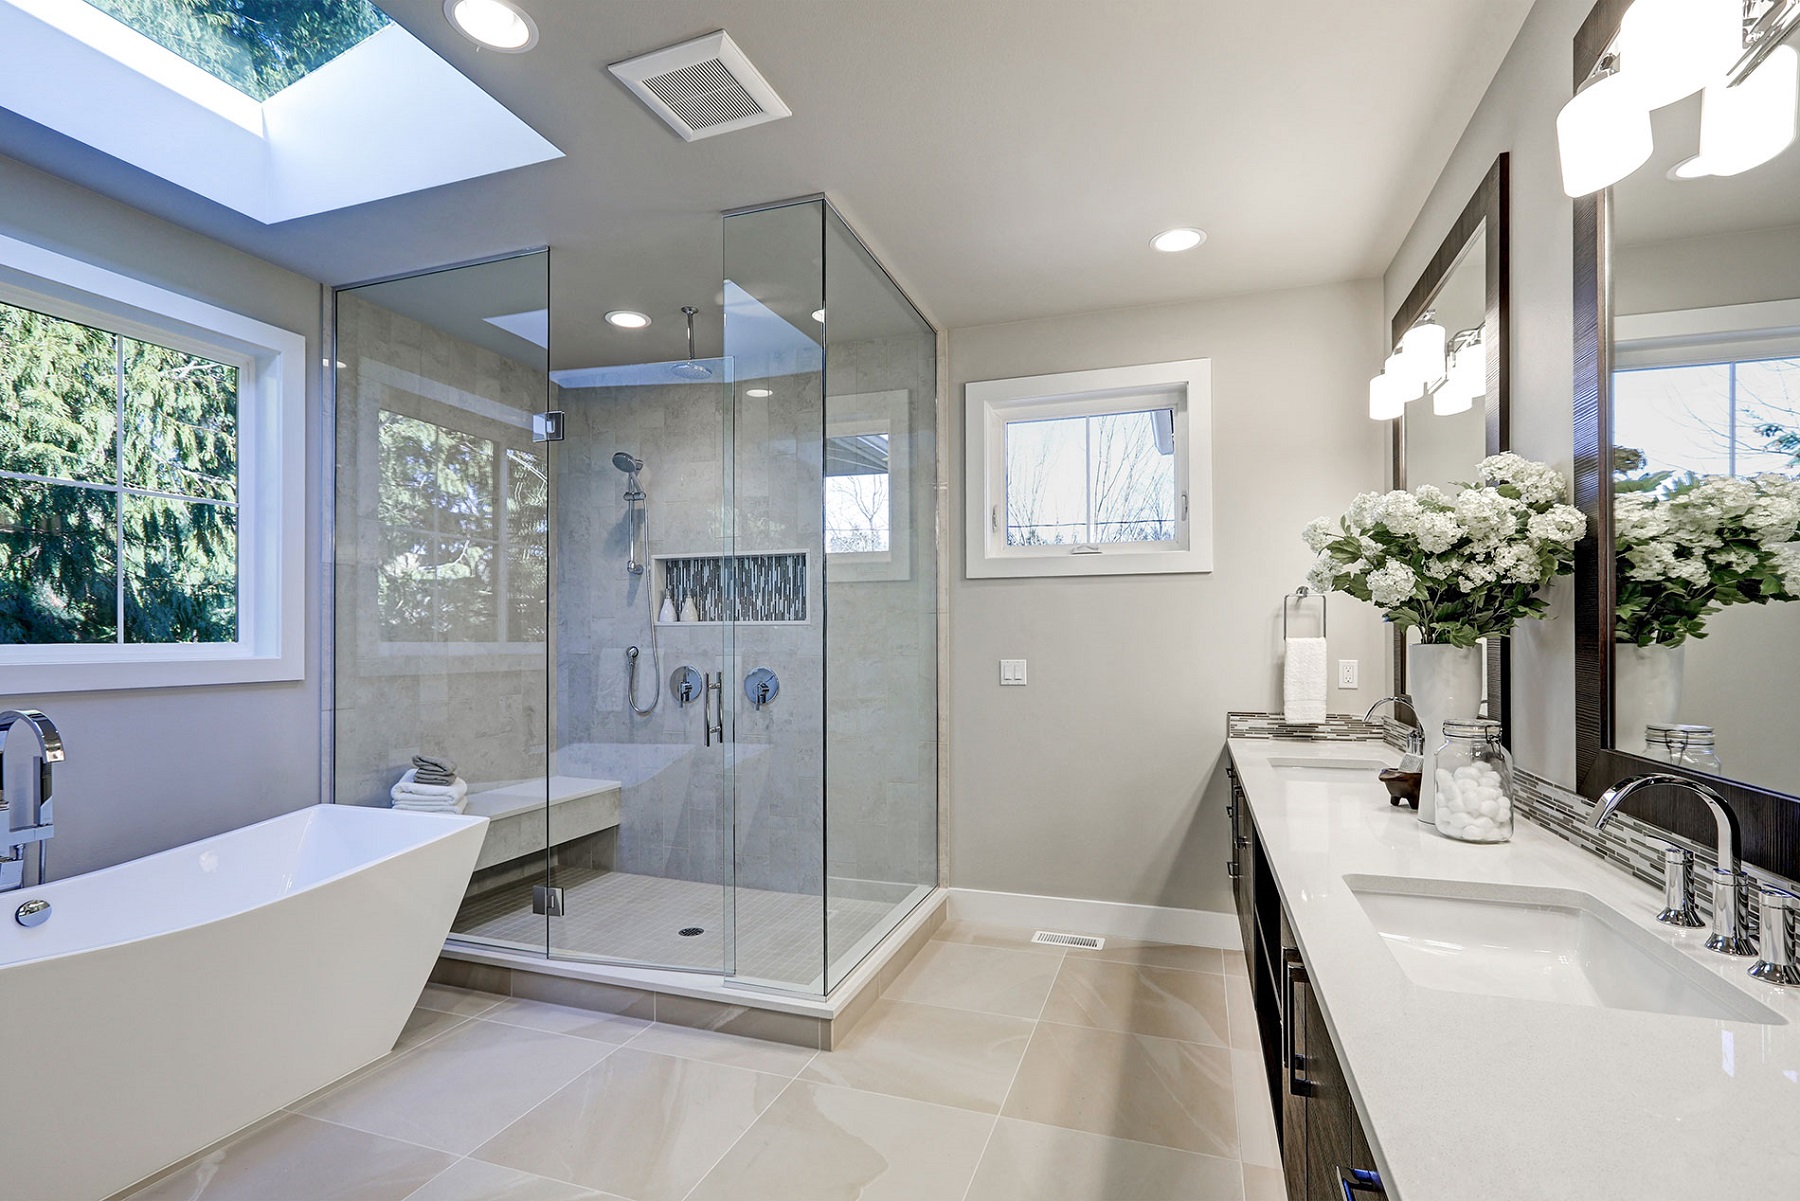 How Much Does A Shower Remodel Cost, How Much Does It Cost To Renovate A Bathroom Shower